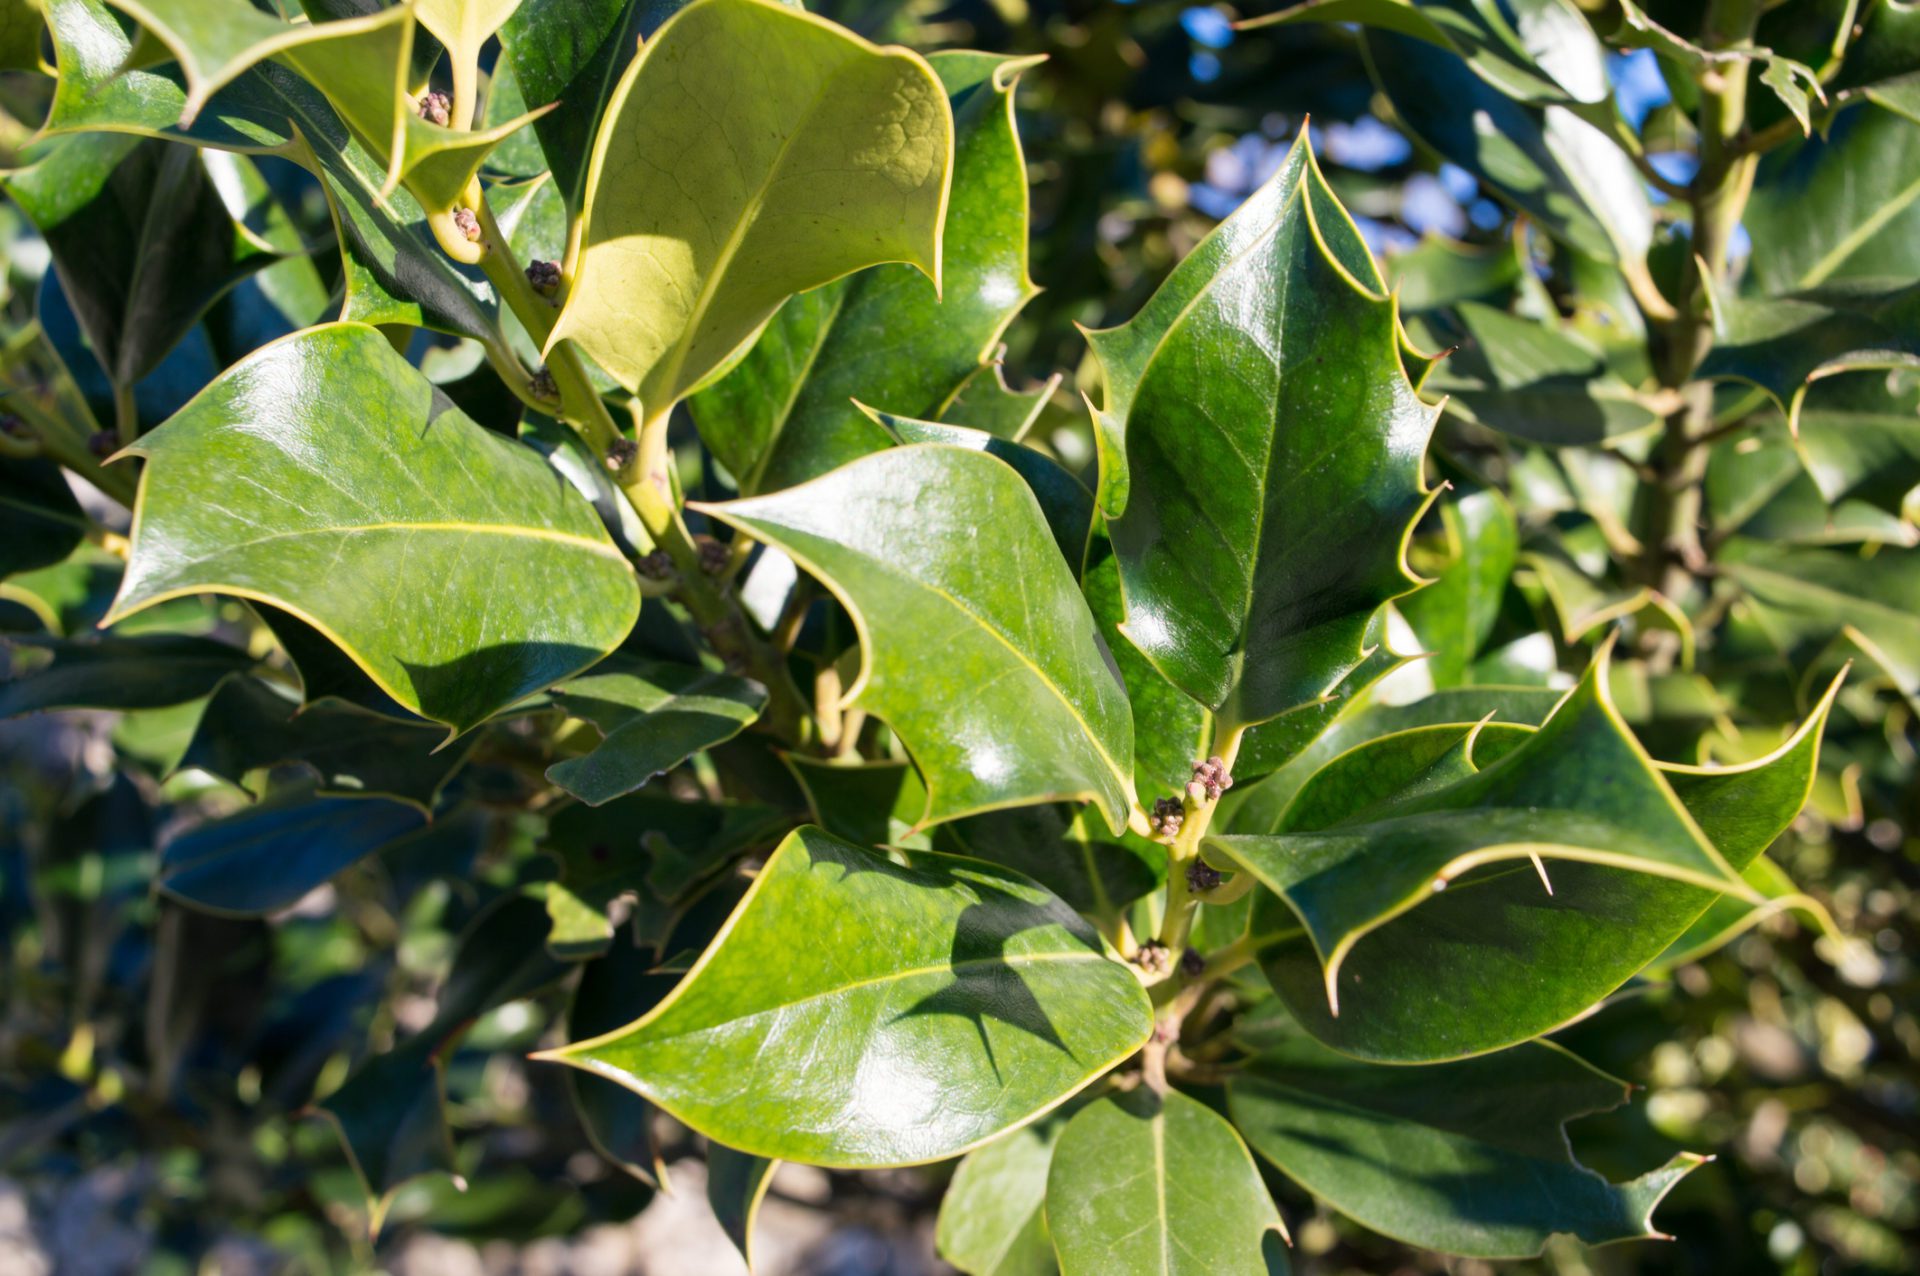 Cold weather shrubs like Holly make a great addition to your landscaping during winter. 